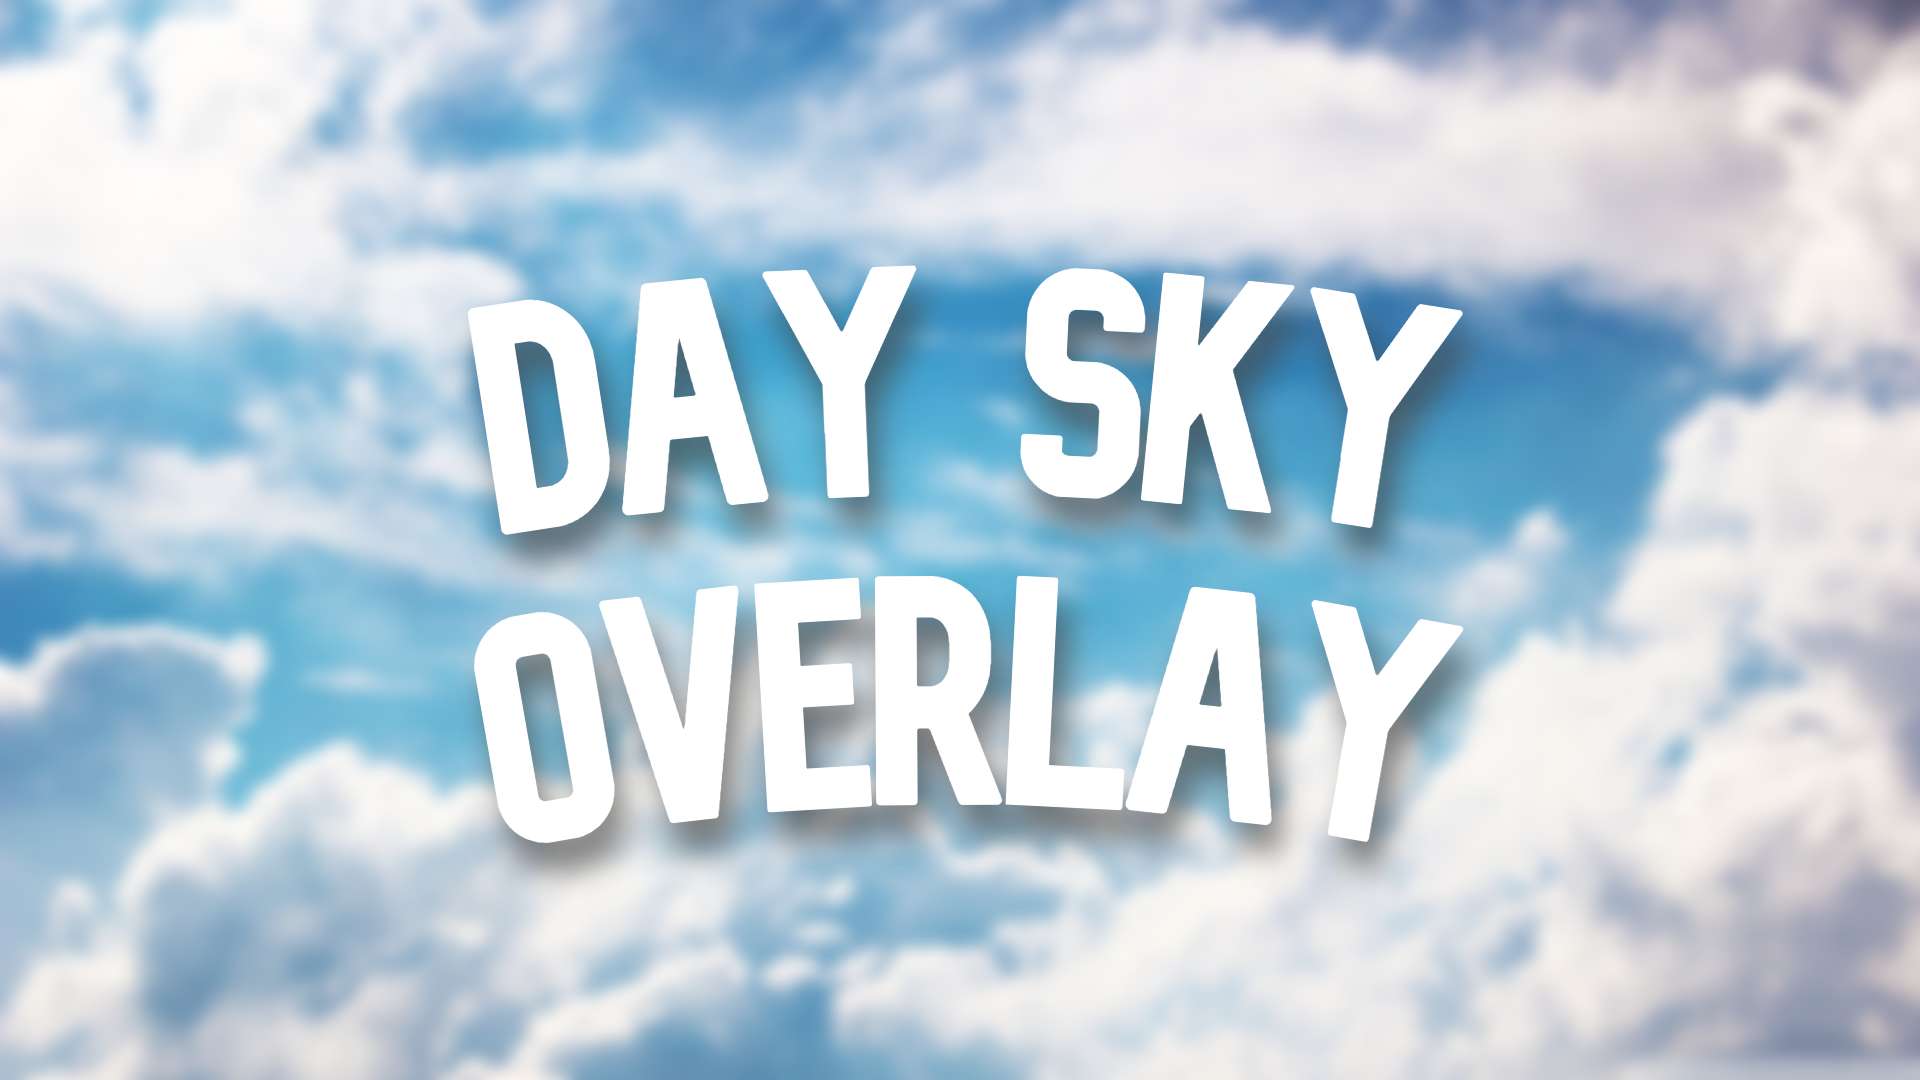 Day Sky Overlay #4 16x by rh56 on PvPRP